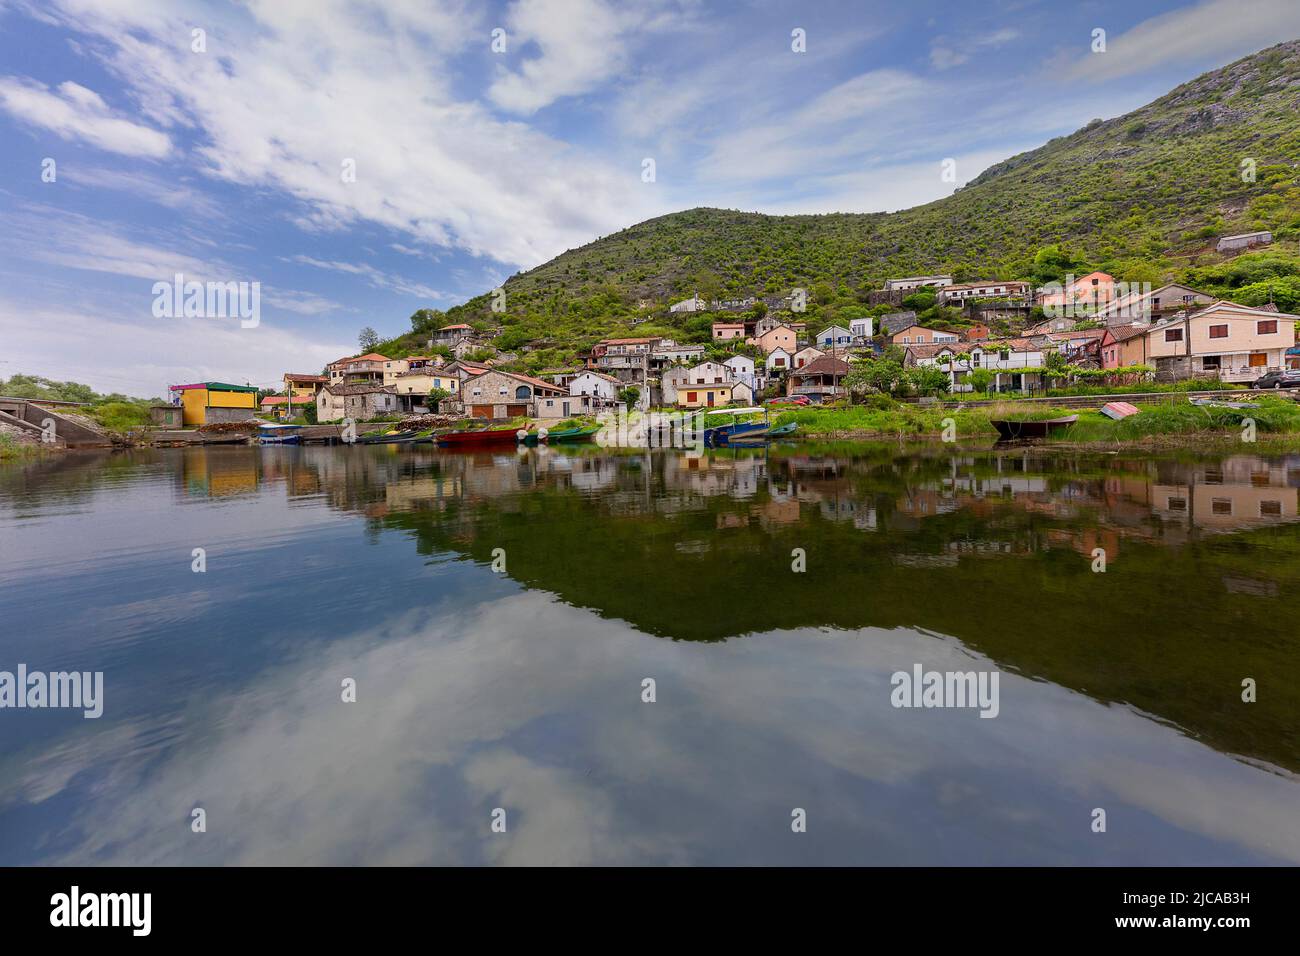 Fishing village with the the reflection of the houses in the Shkoder Lake, Montenegro Stock Photo